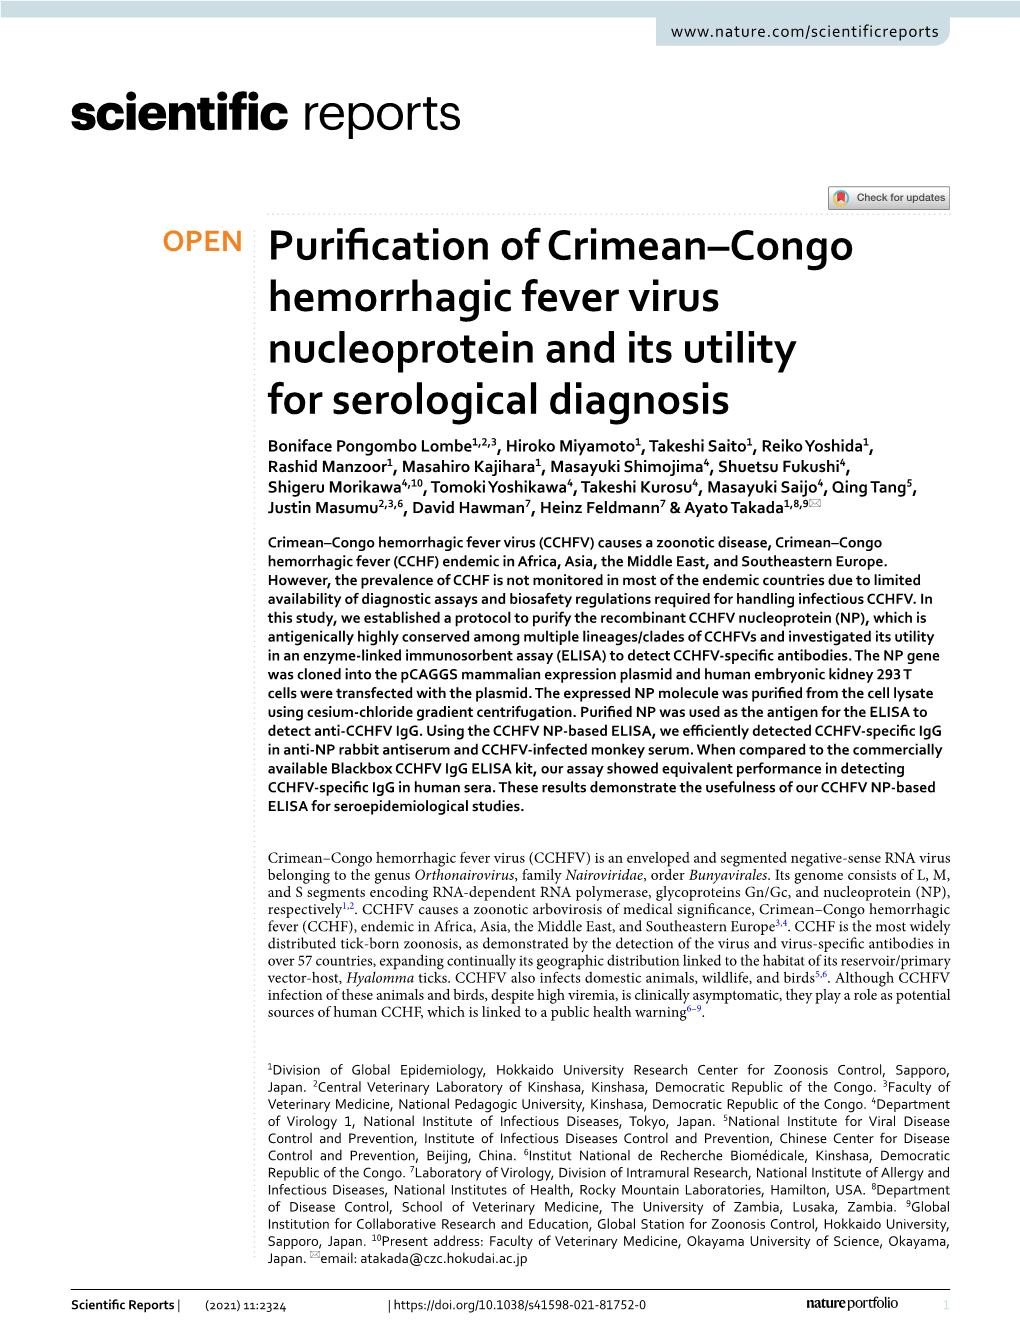 Purification of Crimean–Congo Hemorrhagic Fever Virus Nucleoprotein and Its Utility for Serological Diagnosis